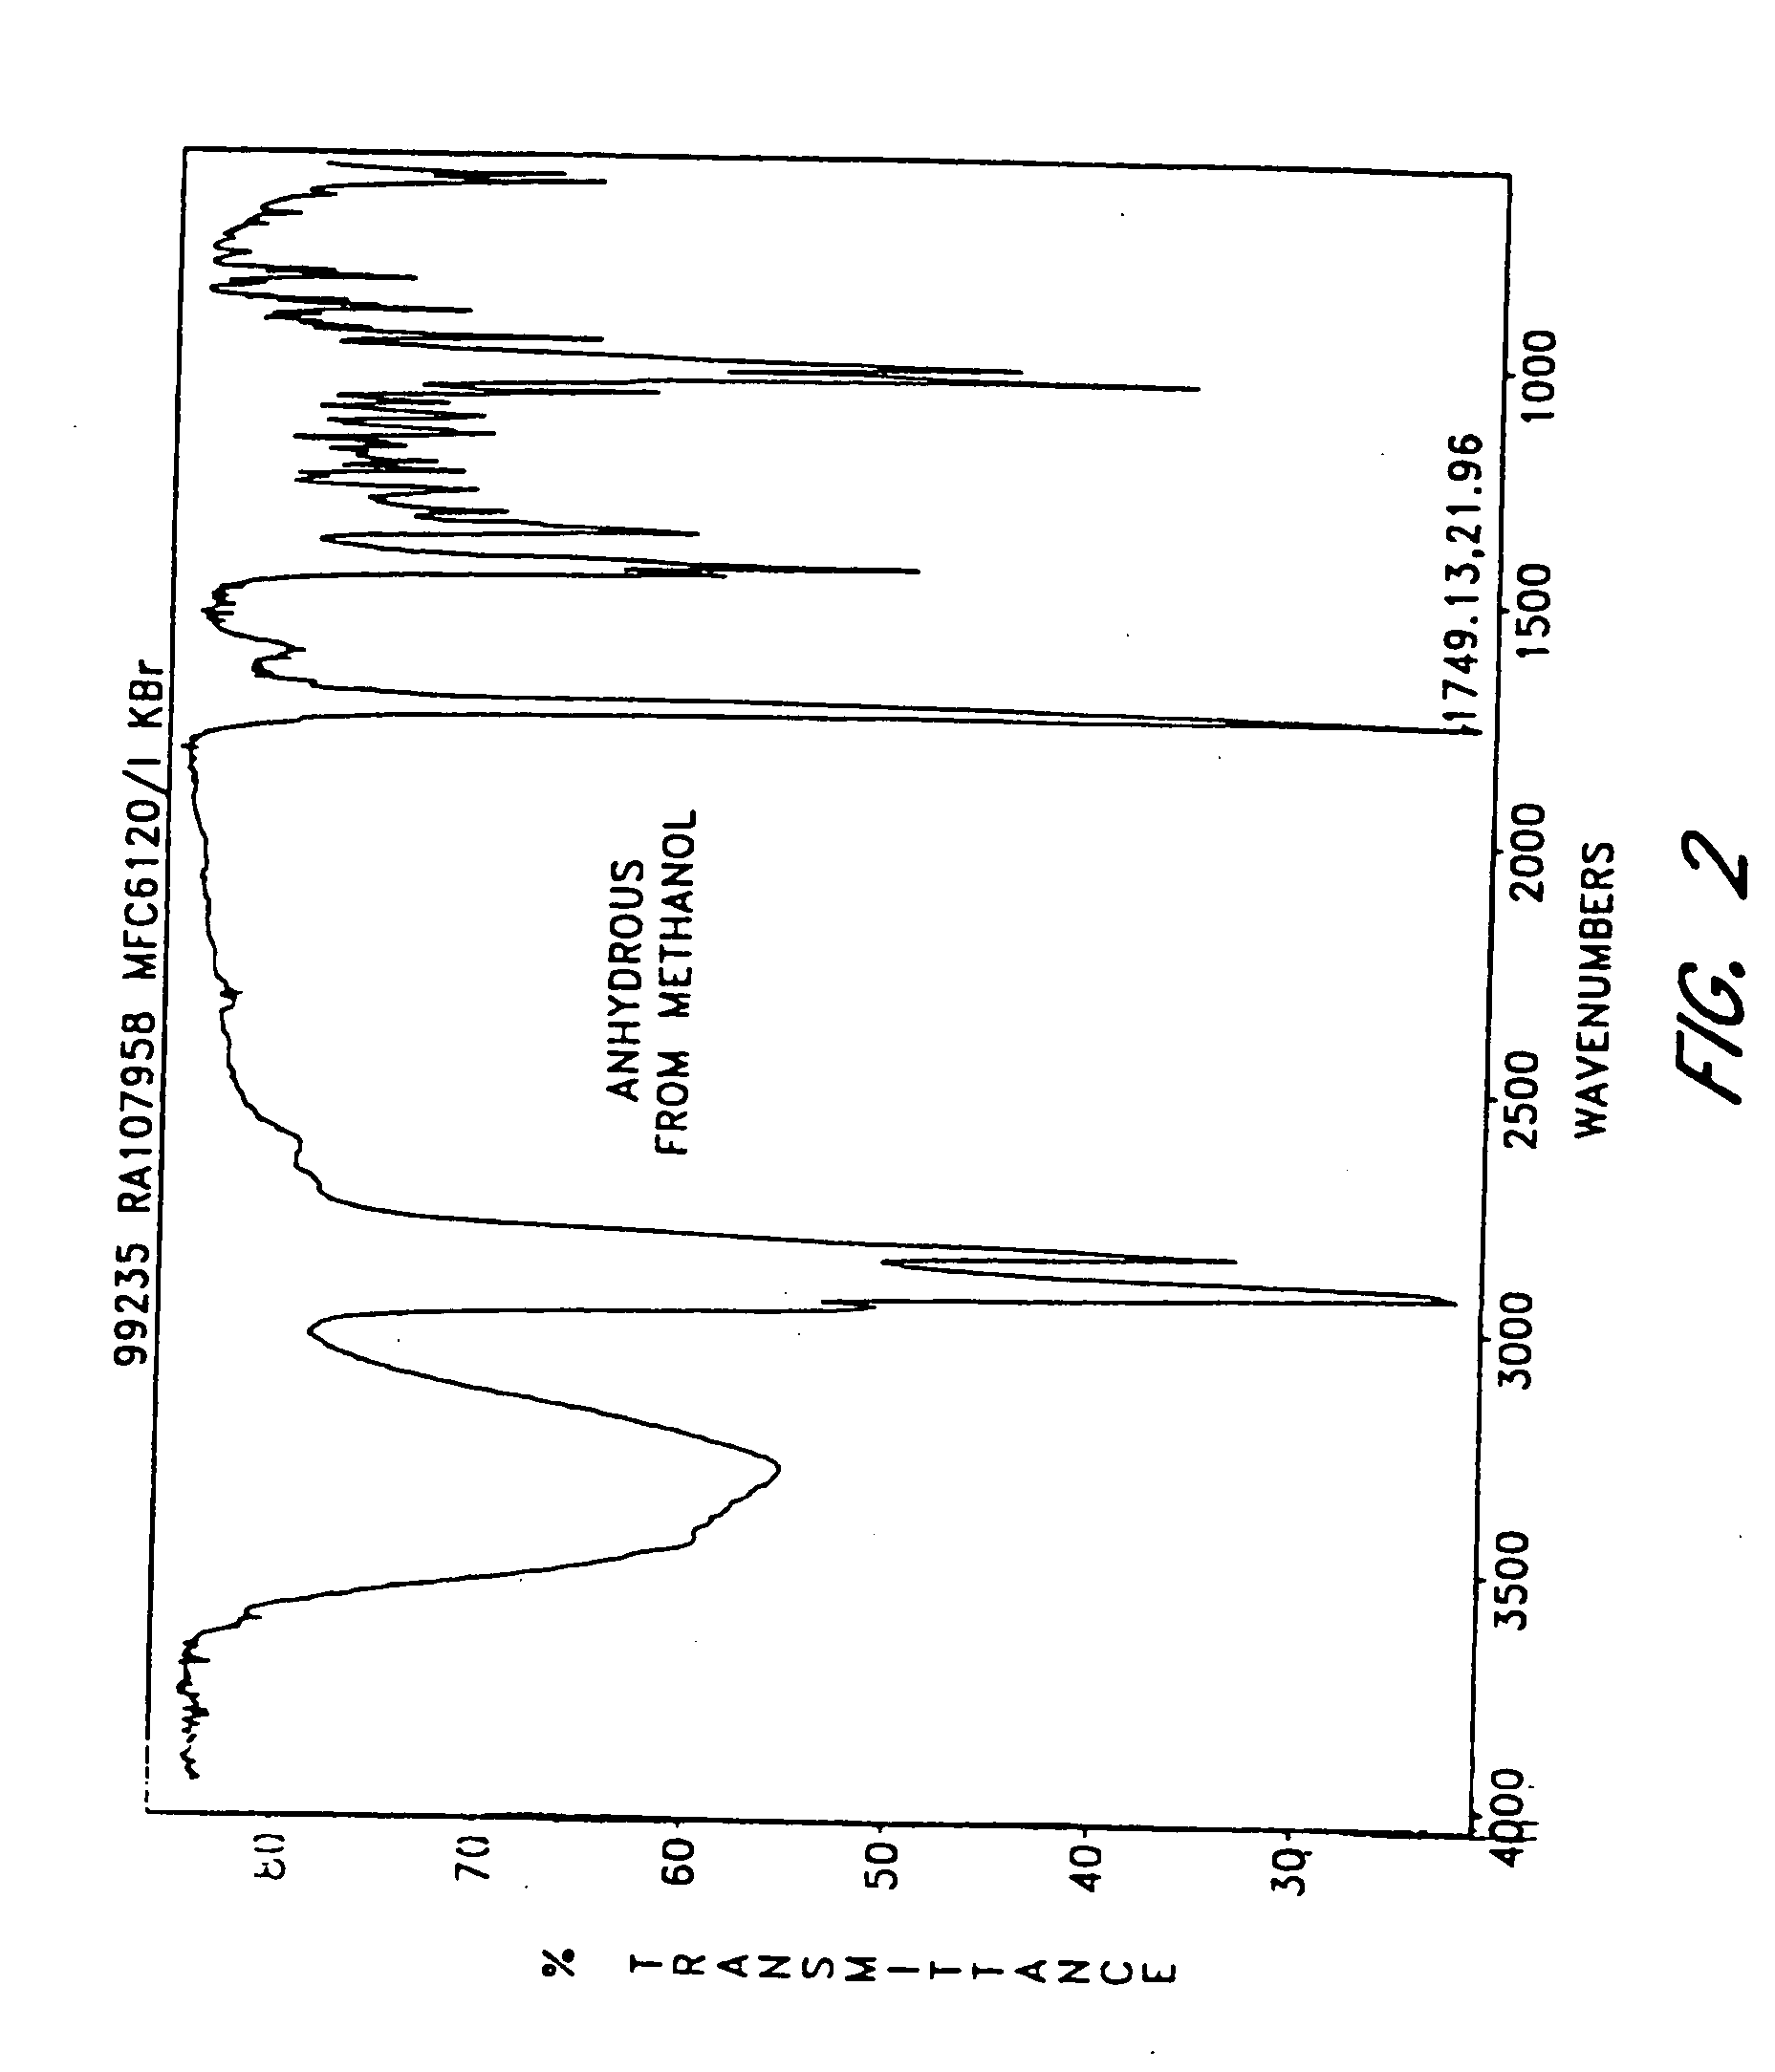 Pharmaceutical treatments and compositions